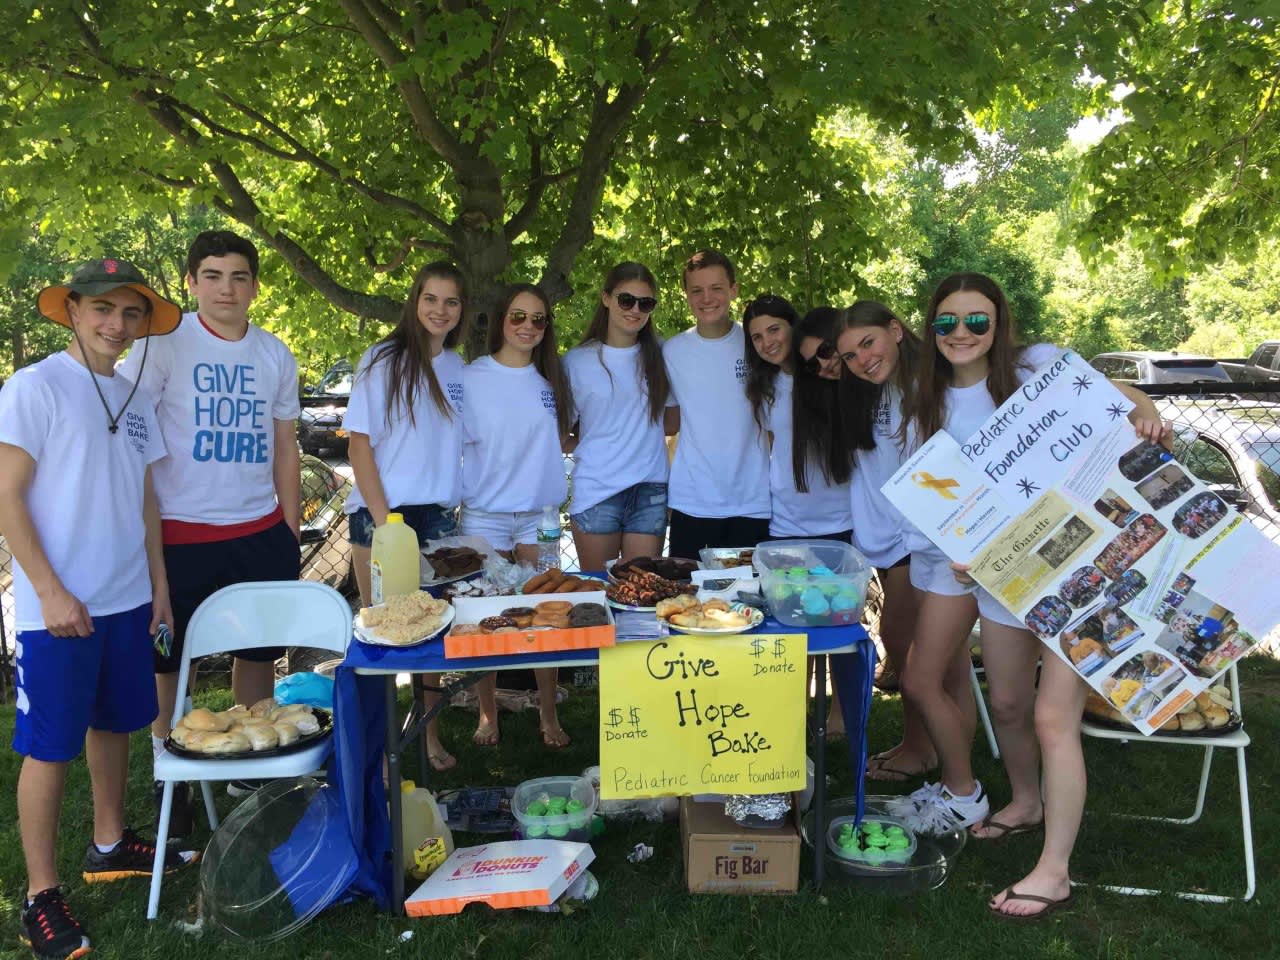 Briarcliff High School’s Pediatric Cancer Club has raised more than $2,500 in recent weeks.